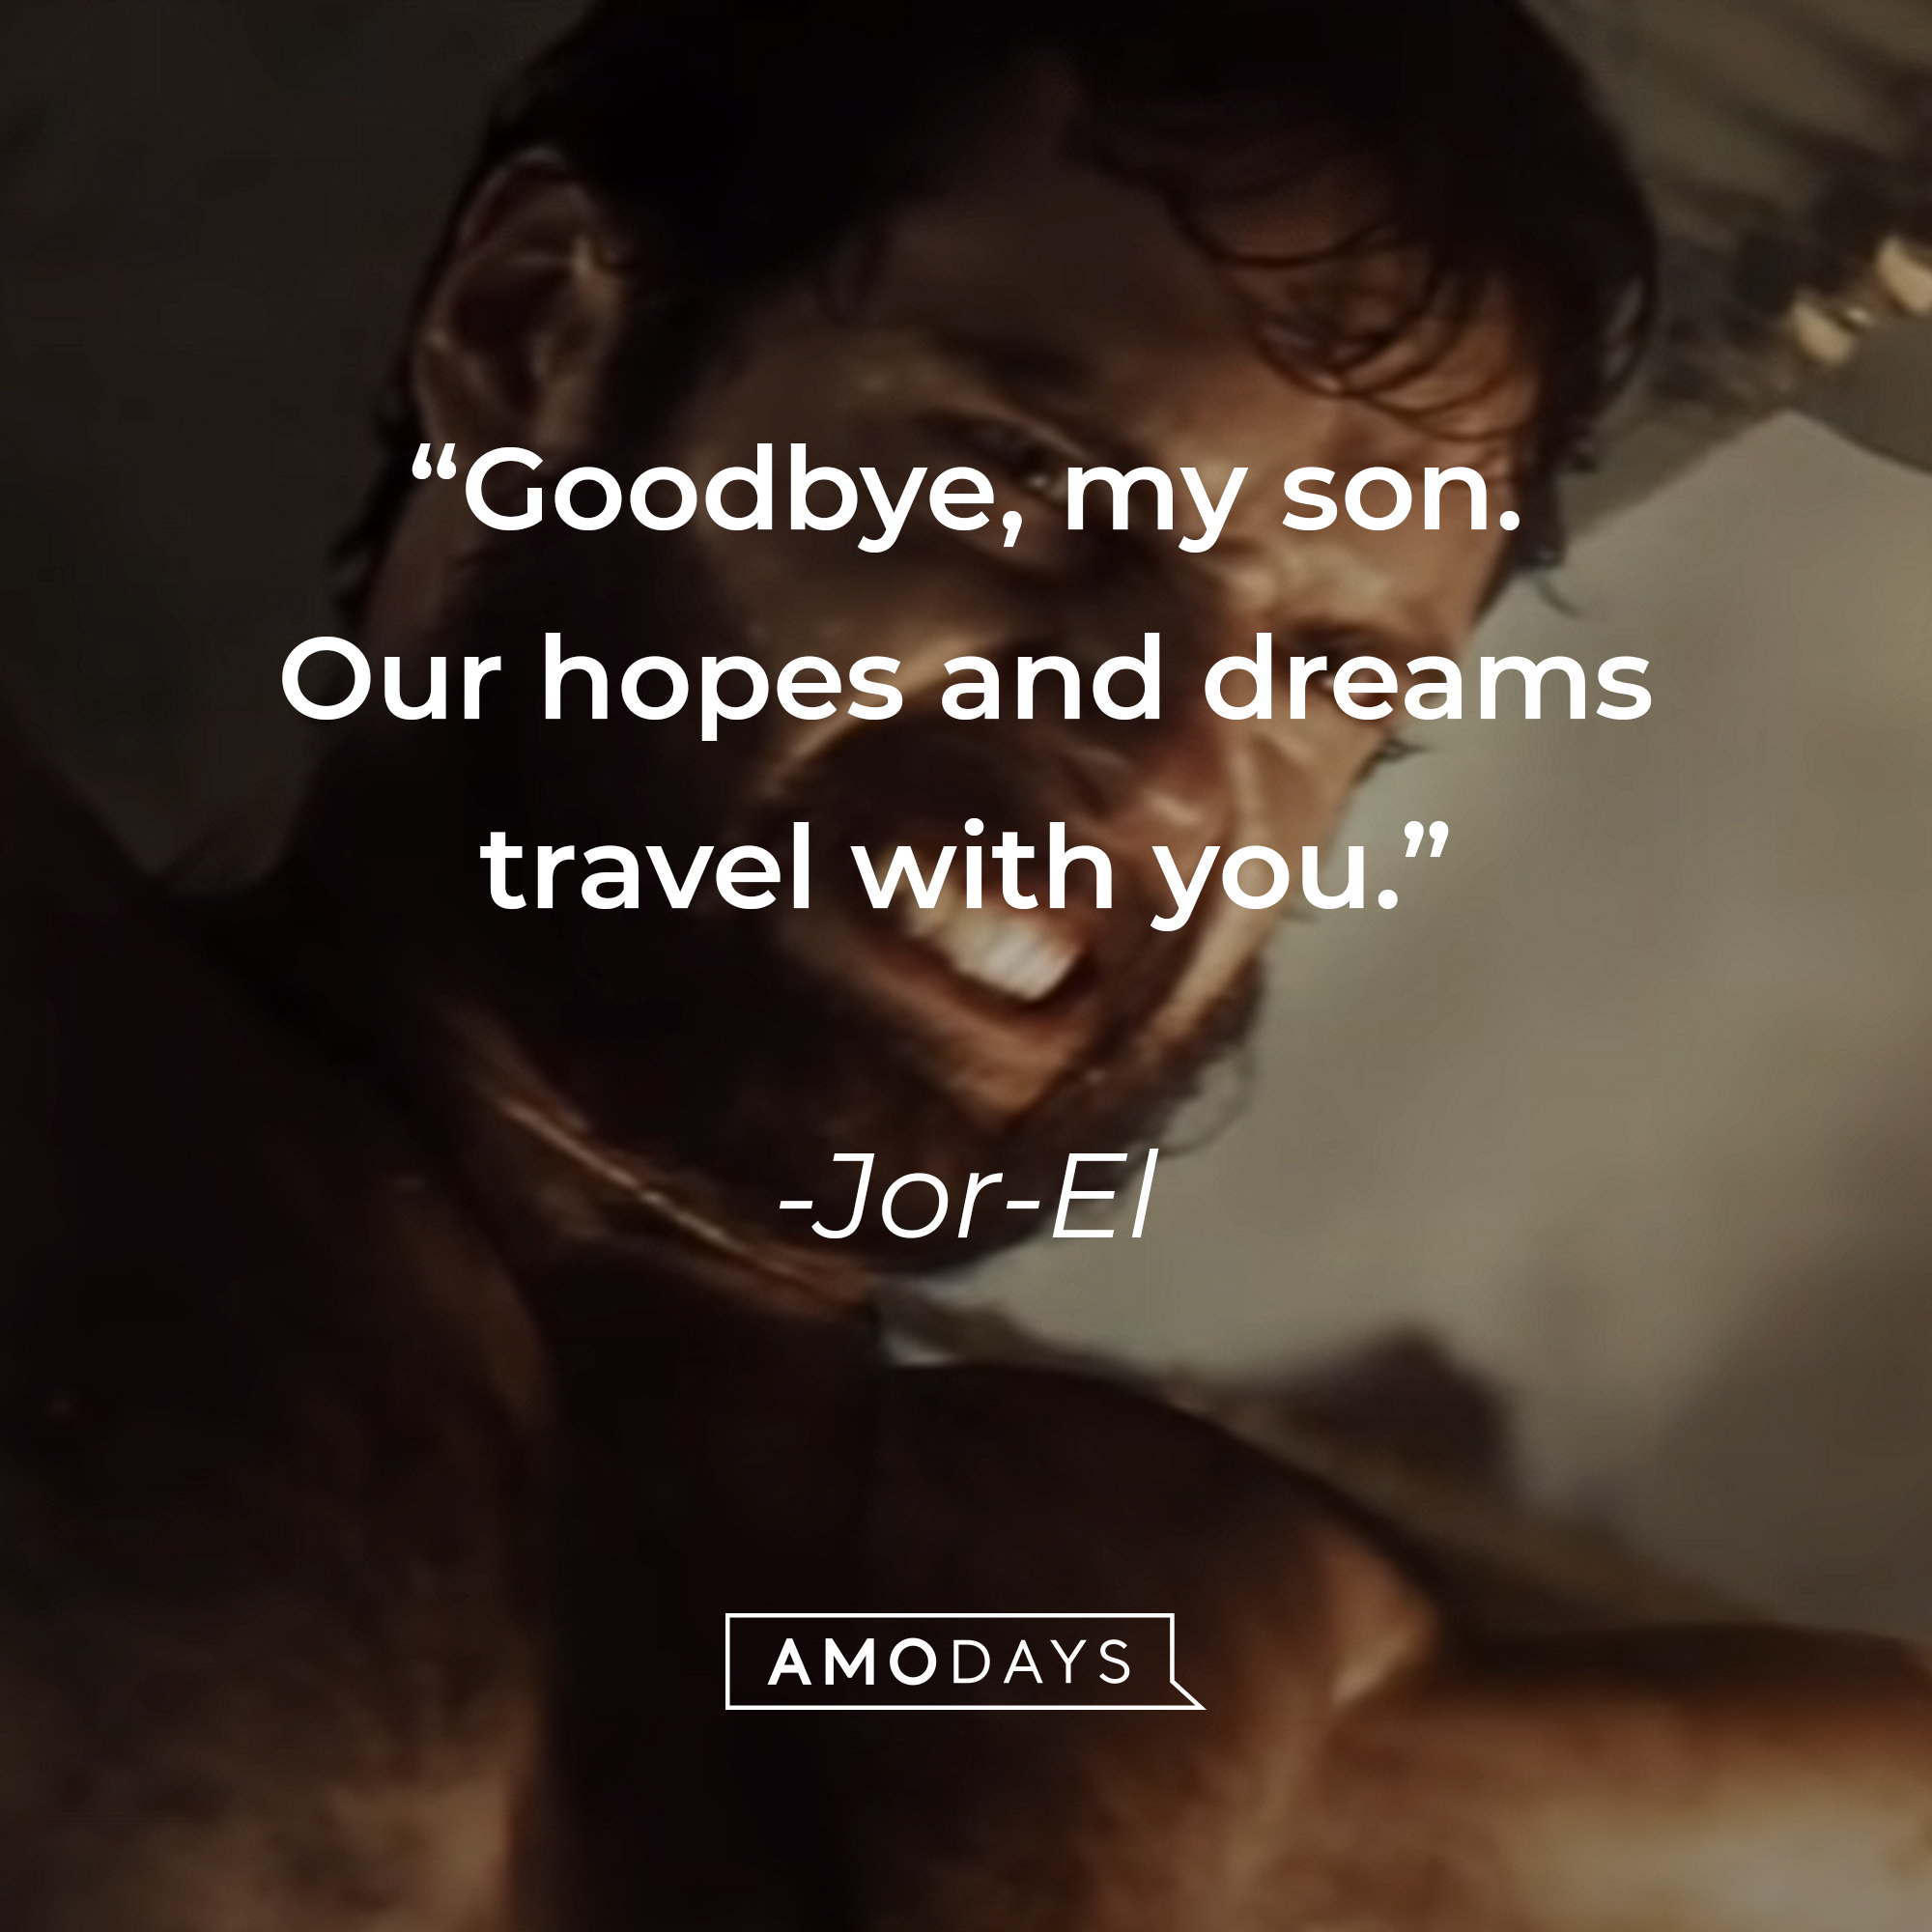 Jor-El's quote: "Goodbye, my son. Our hopes and dreams travel with you." | Source: Youtube.com/WarnerBrosPictures